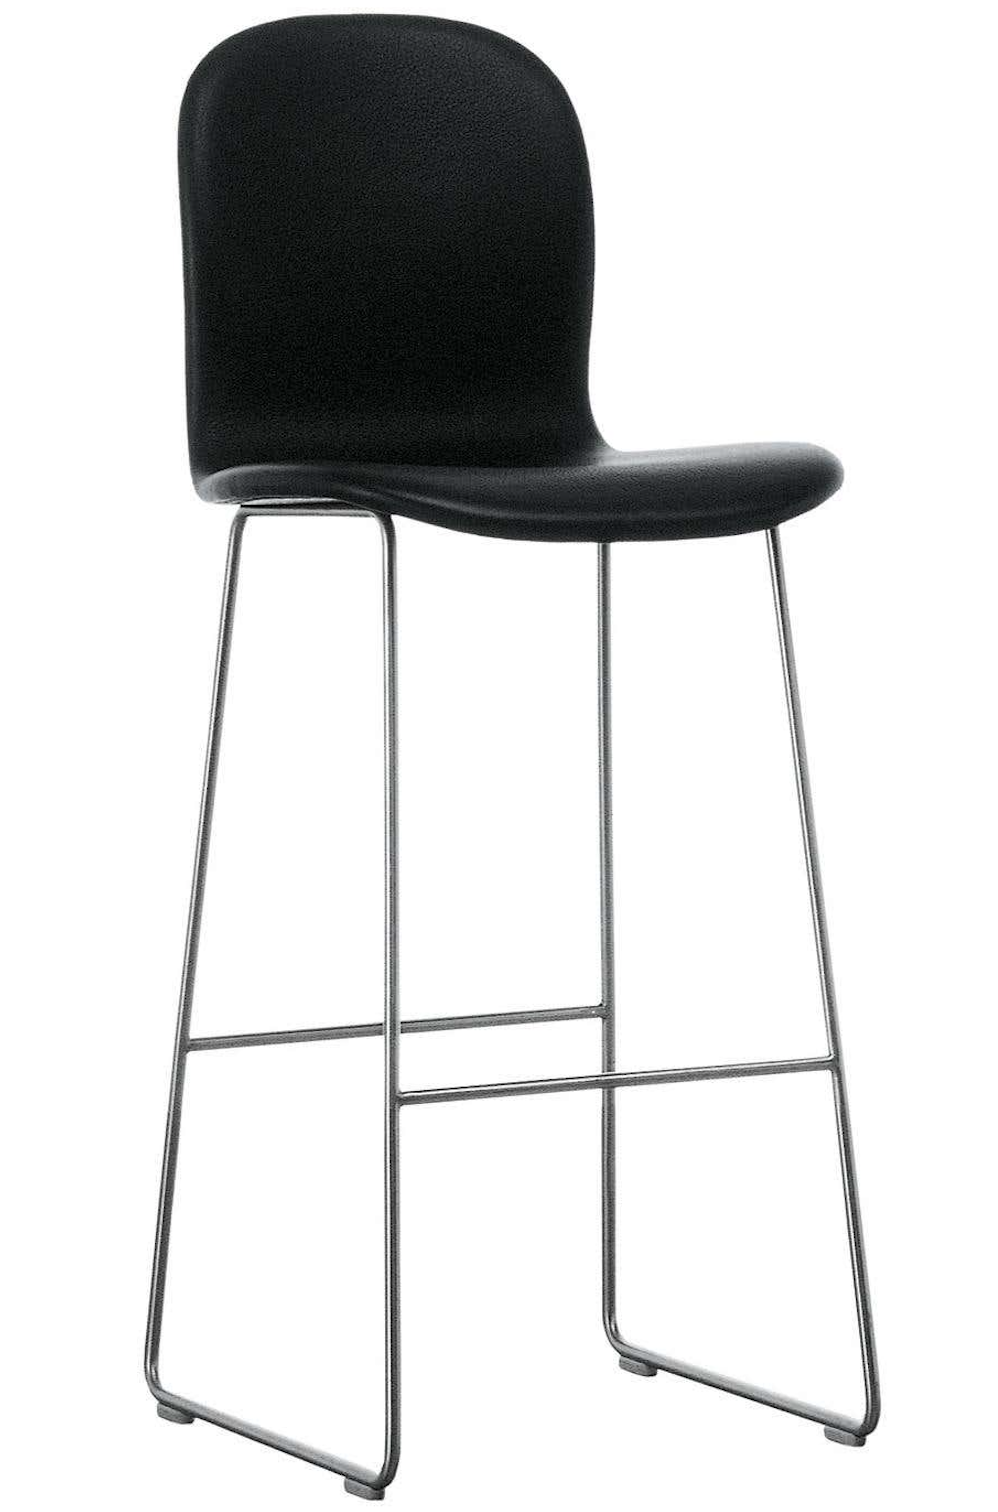 Product Image Tate stool With Back